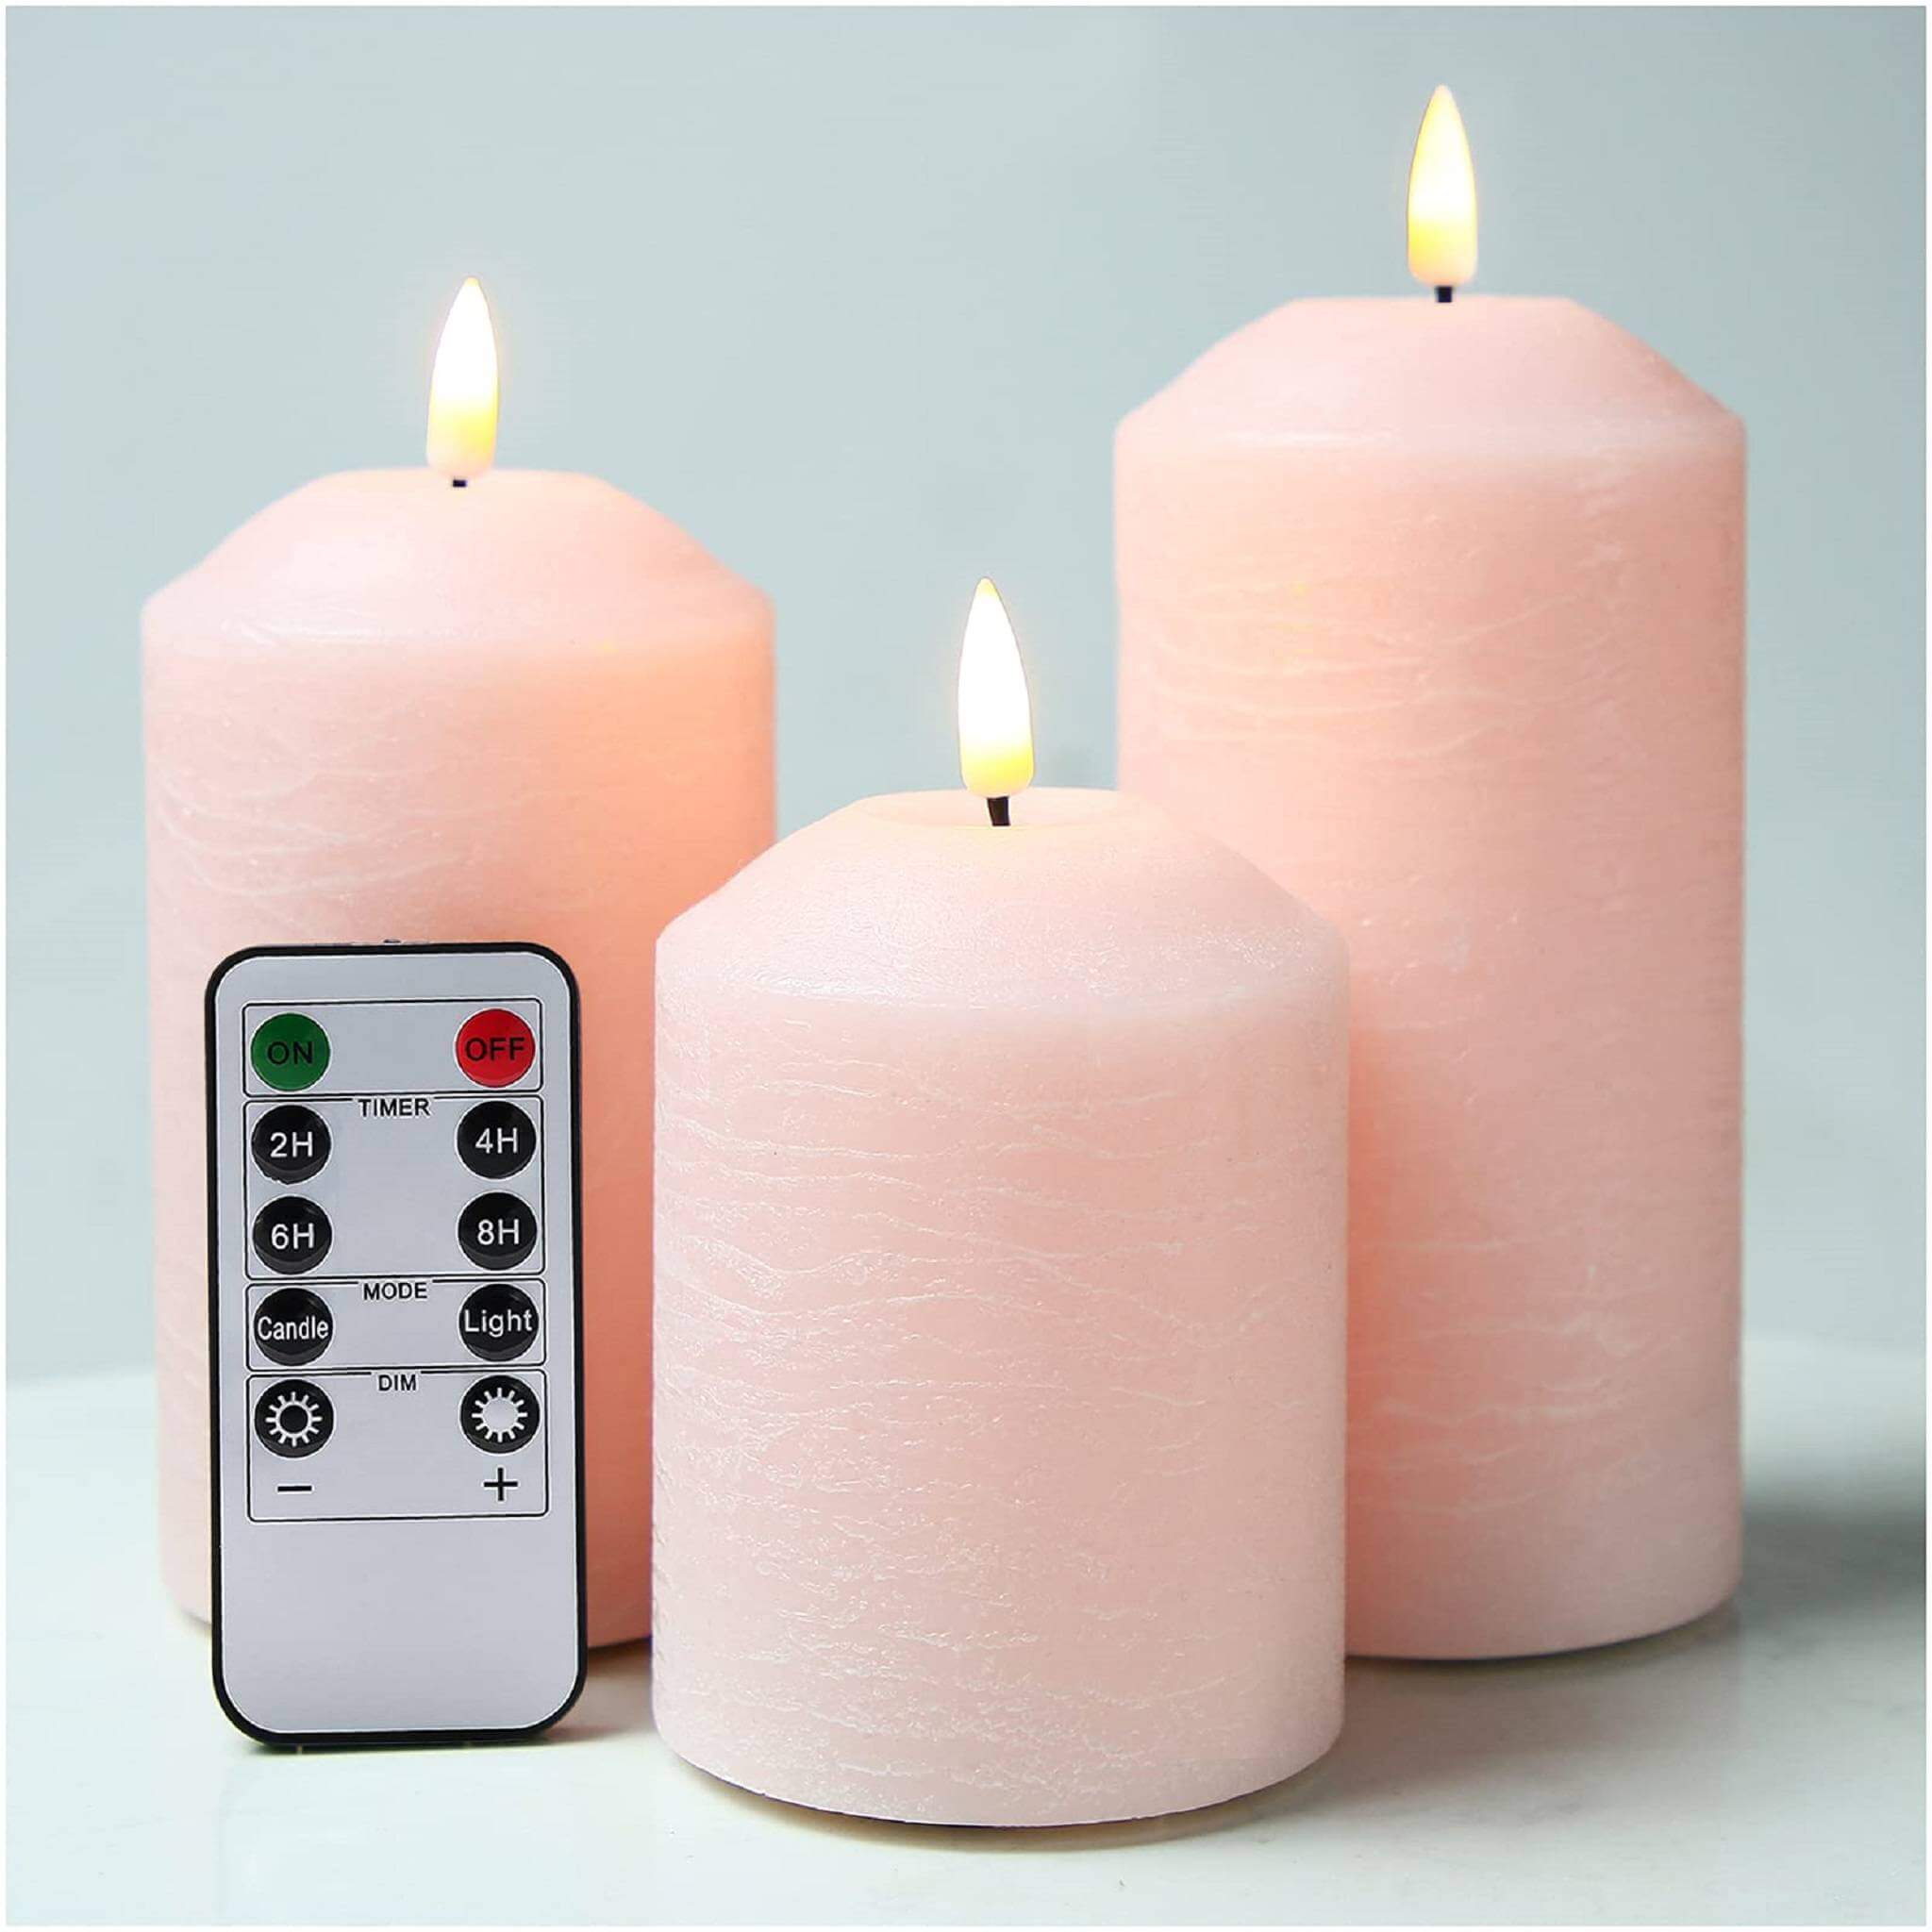 Set of 3 Blush Pink Flameless Pillar Candles with Remote